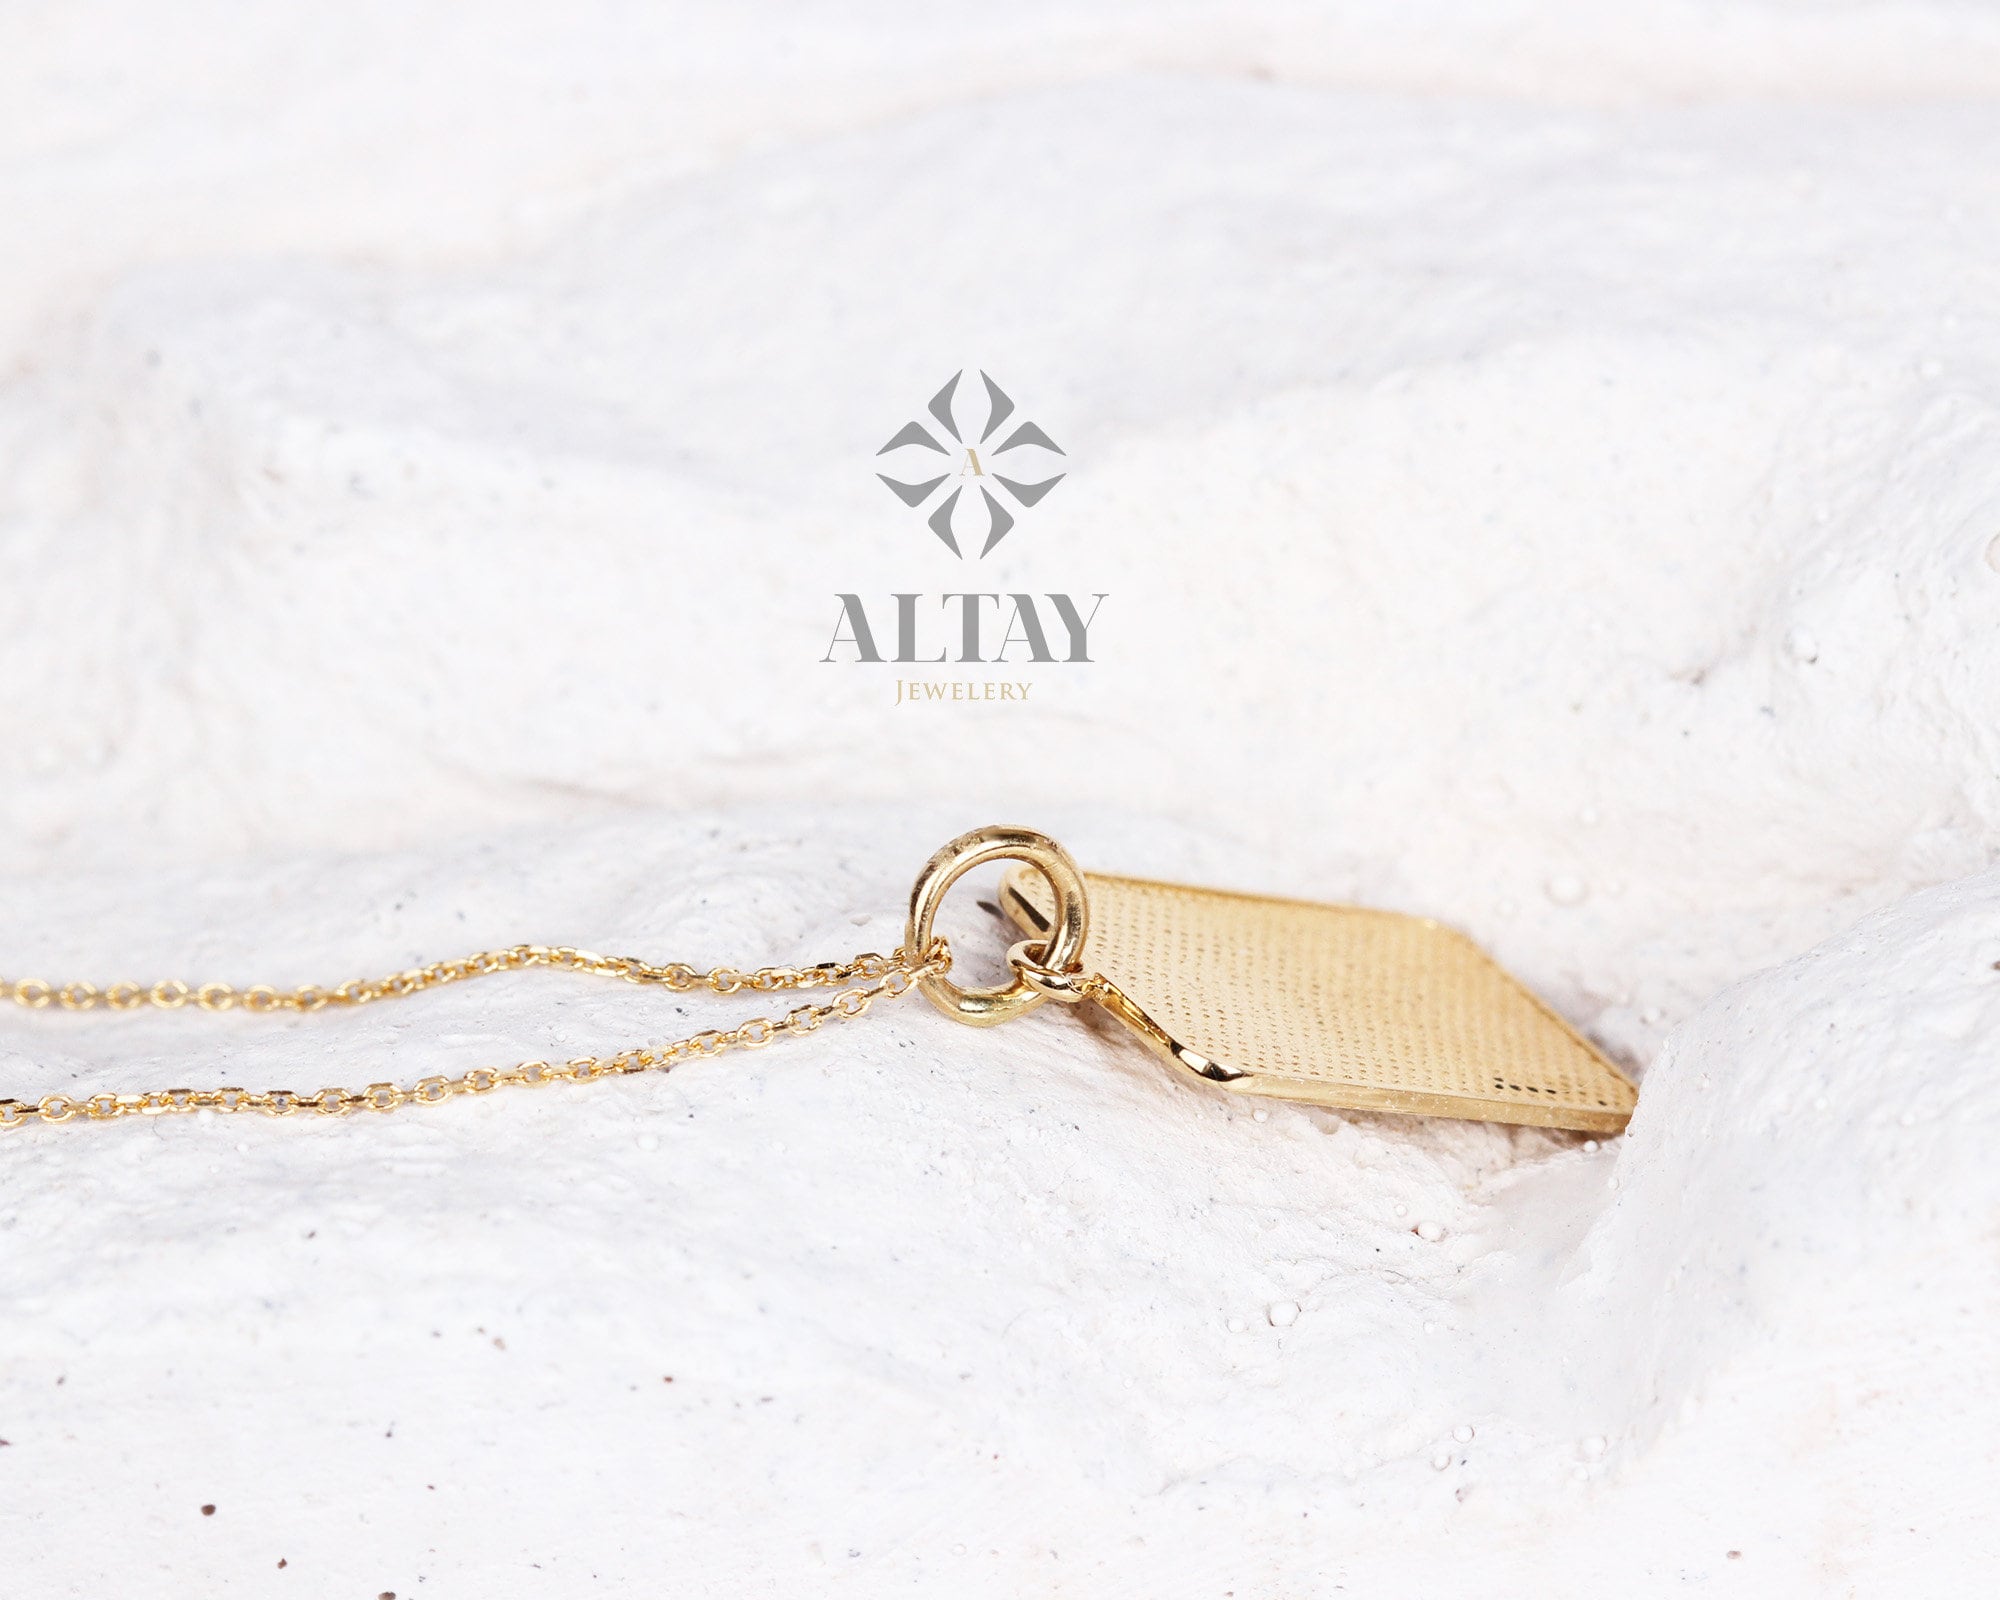 14K Gold Rectangle ID Necklace, Personalized Initial Choker, Custom Name Charm, Medical ID Necklace, Engraved Date Pendant, Gift For Her